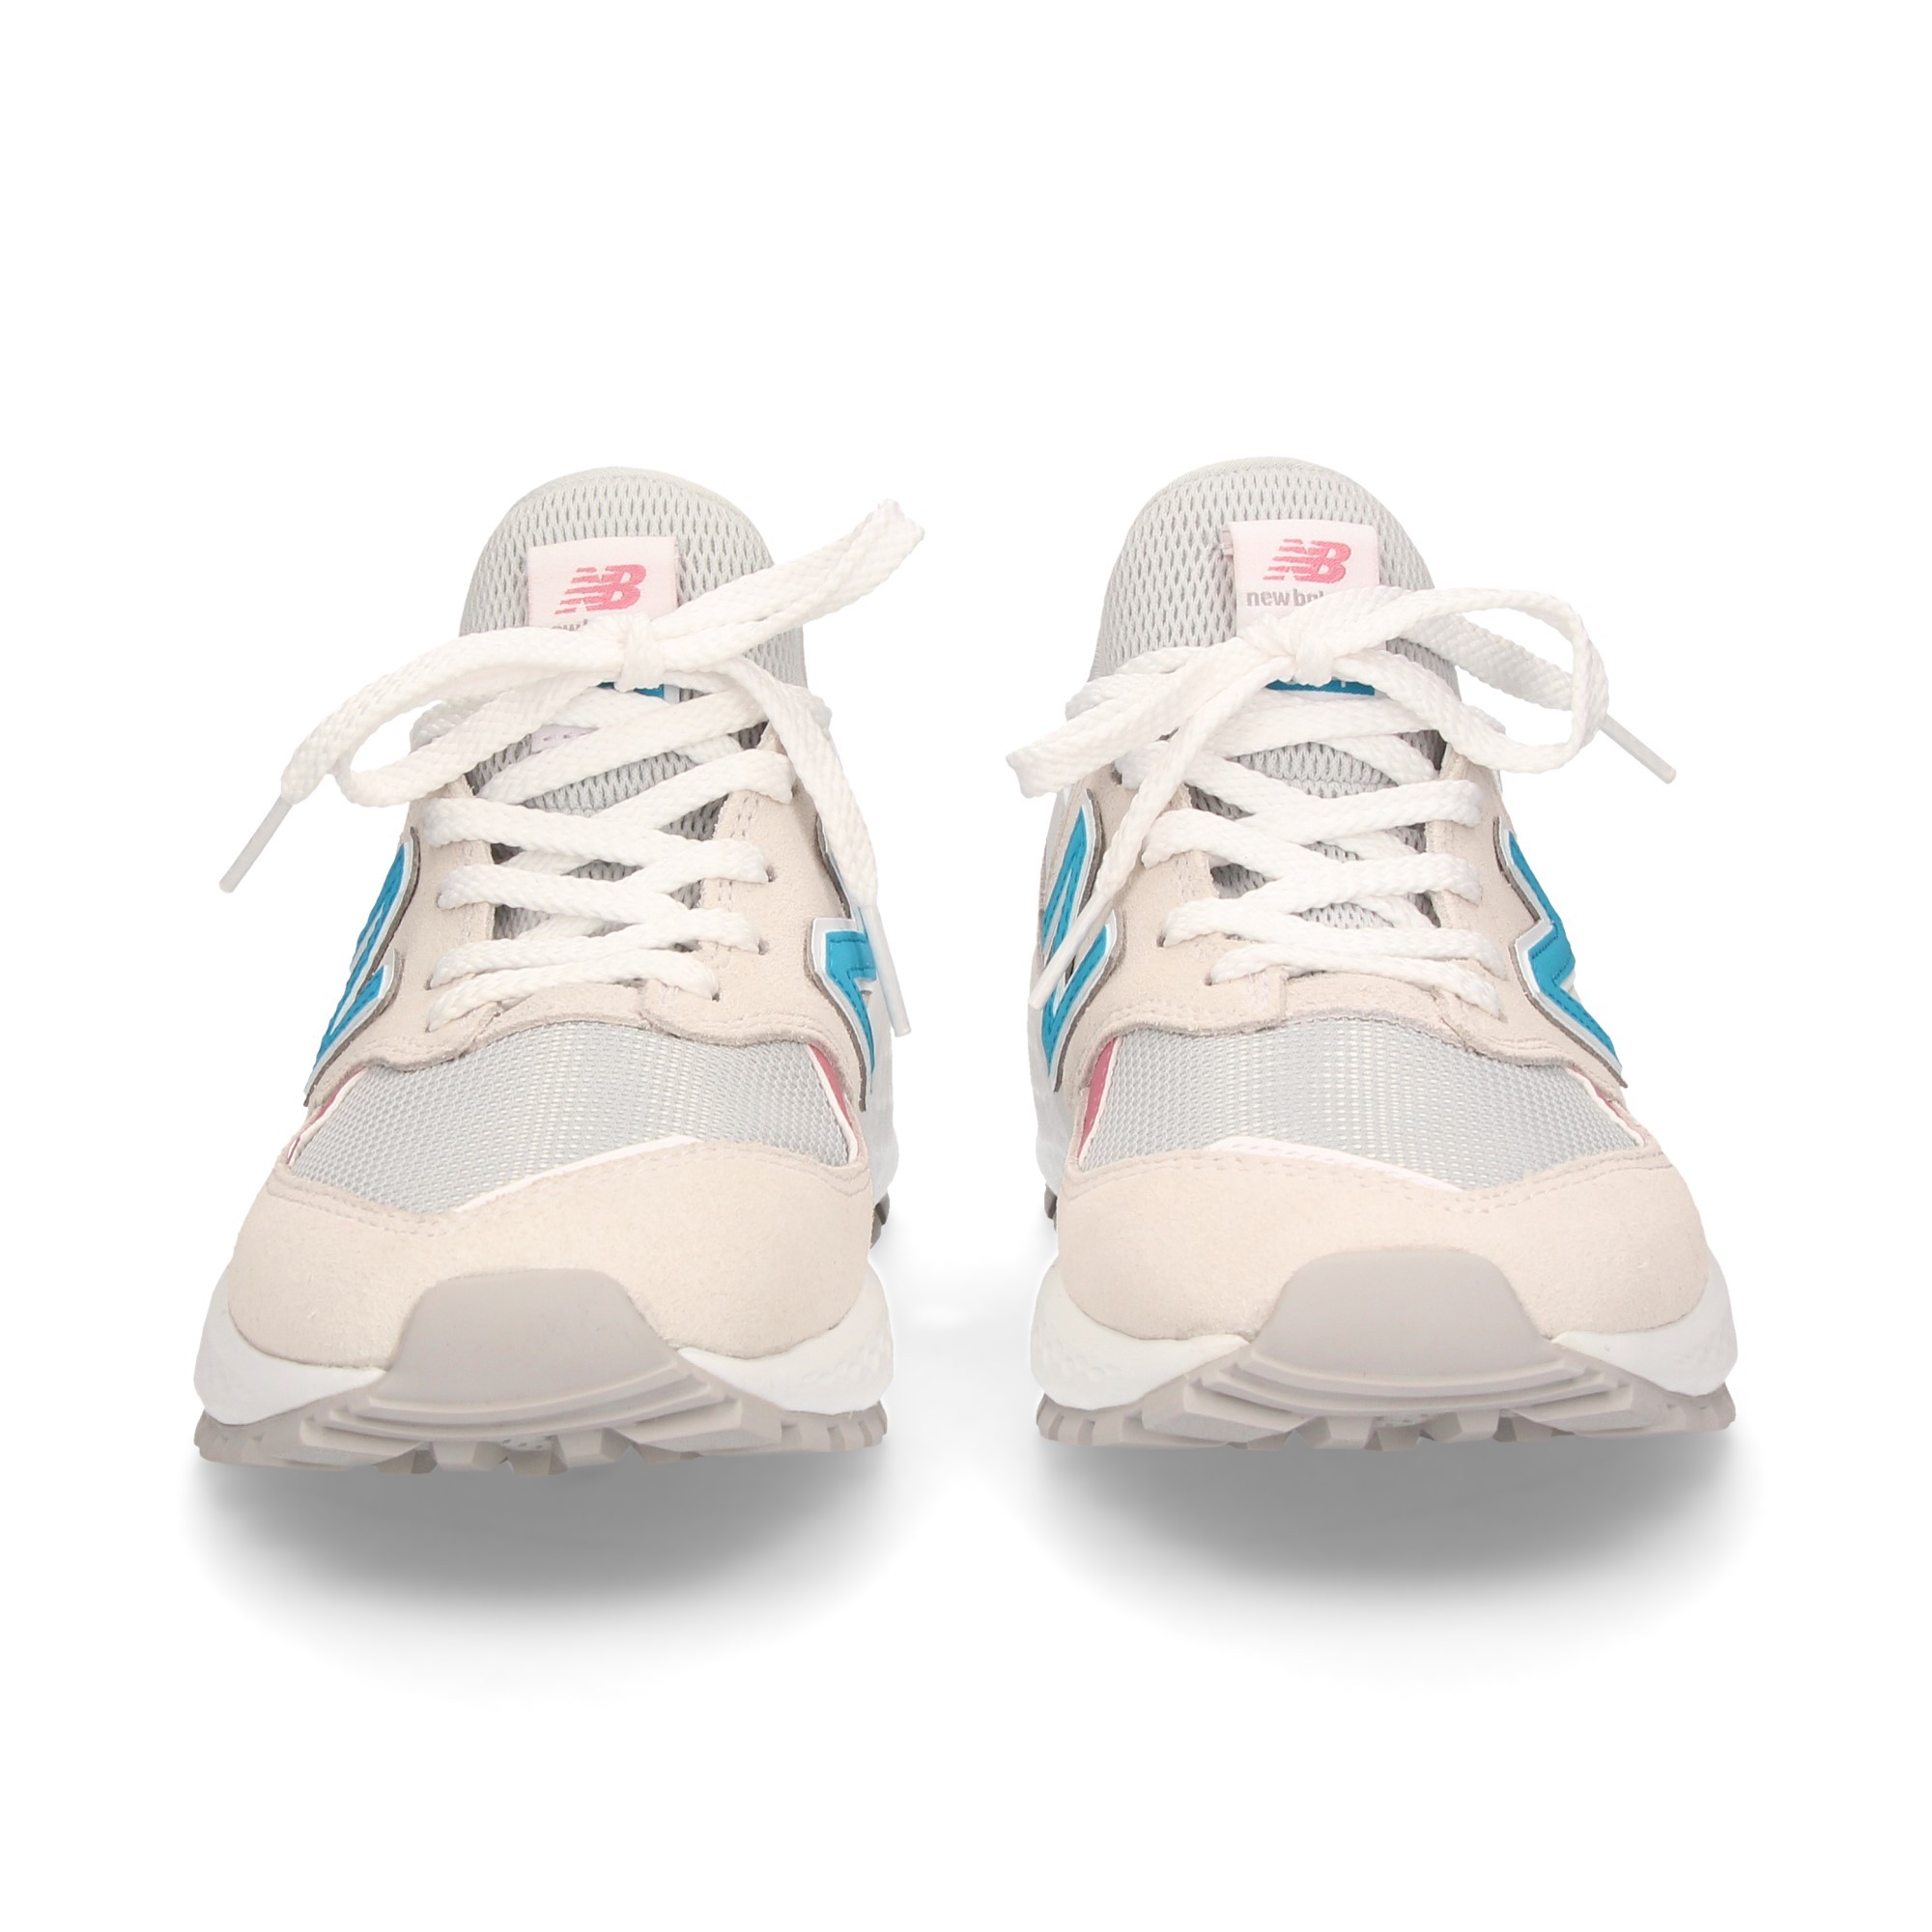 sports-mesh-grey-suede-white-blue